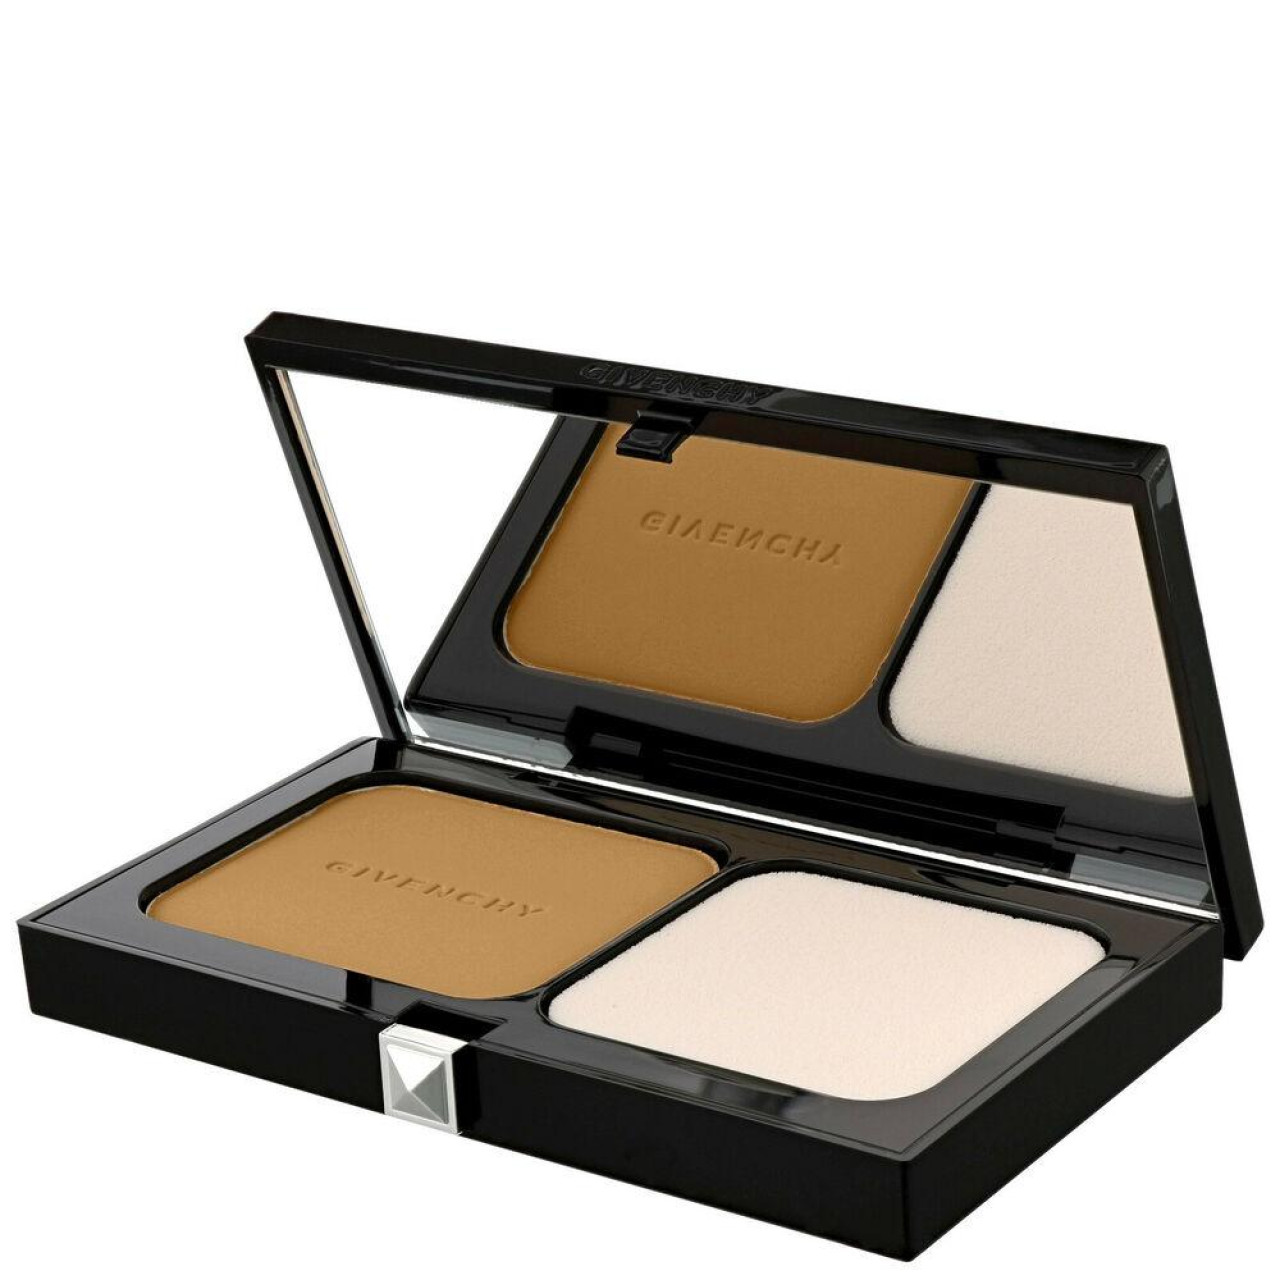 Givenchy matissime velvet compact 6